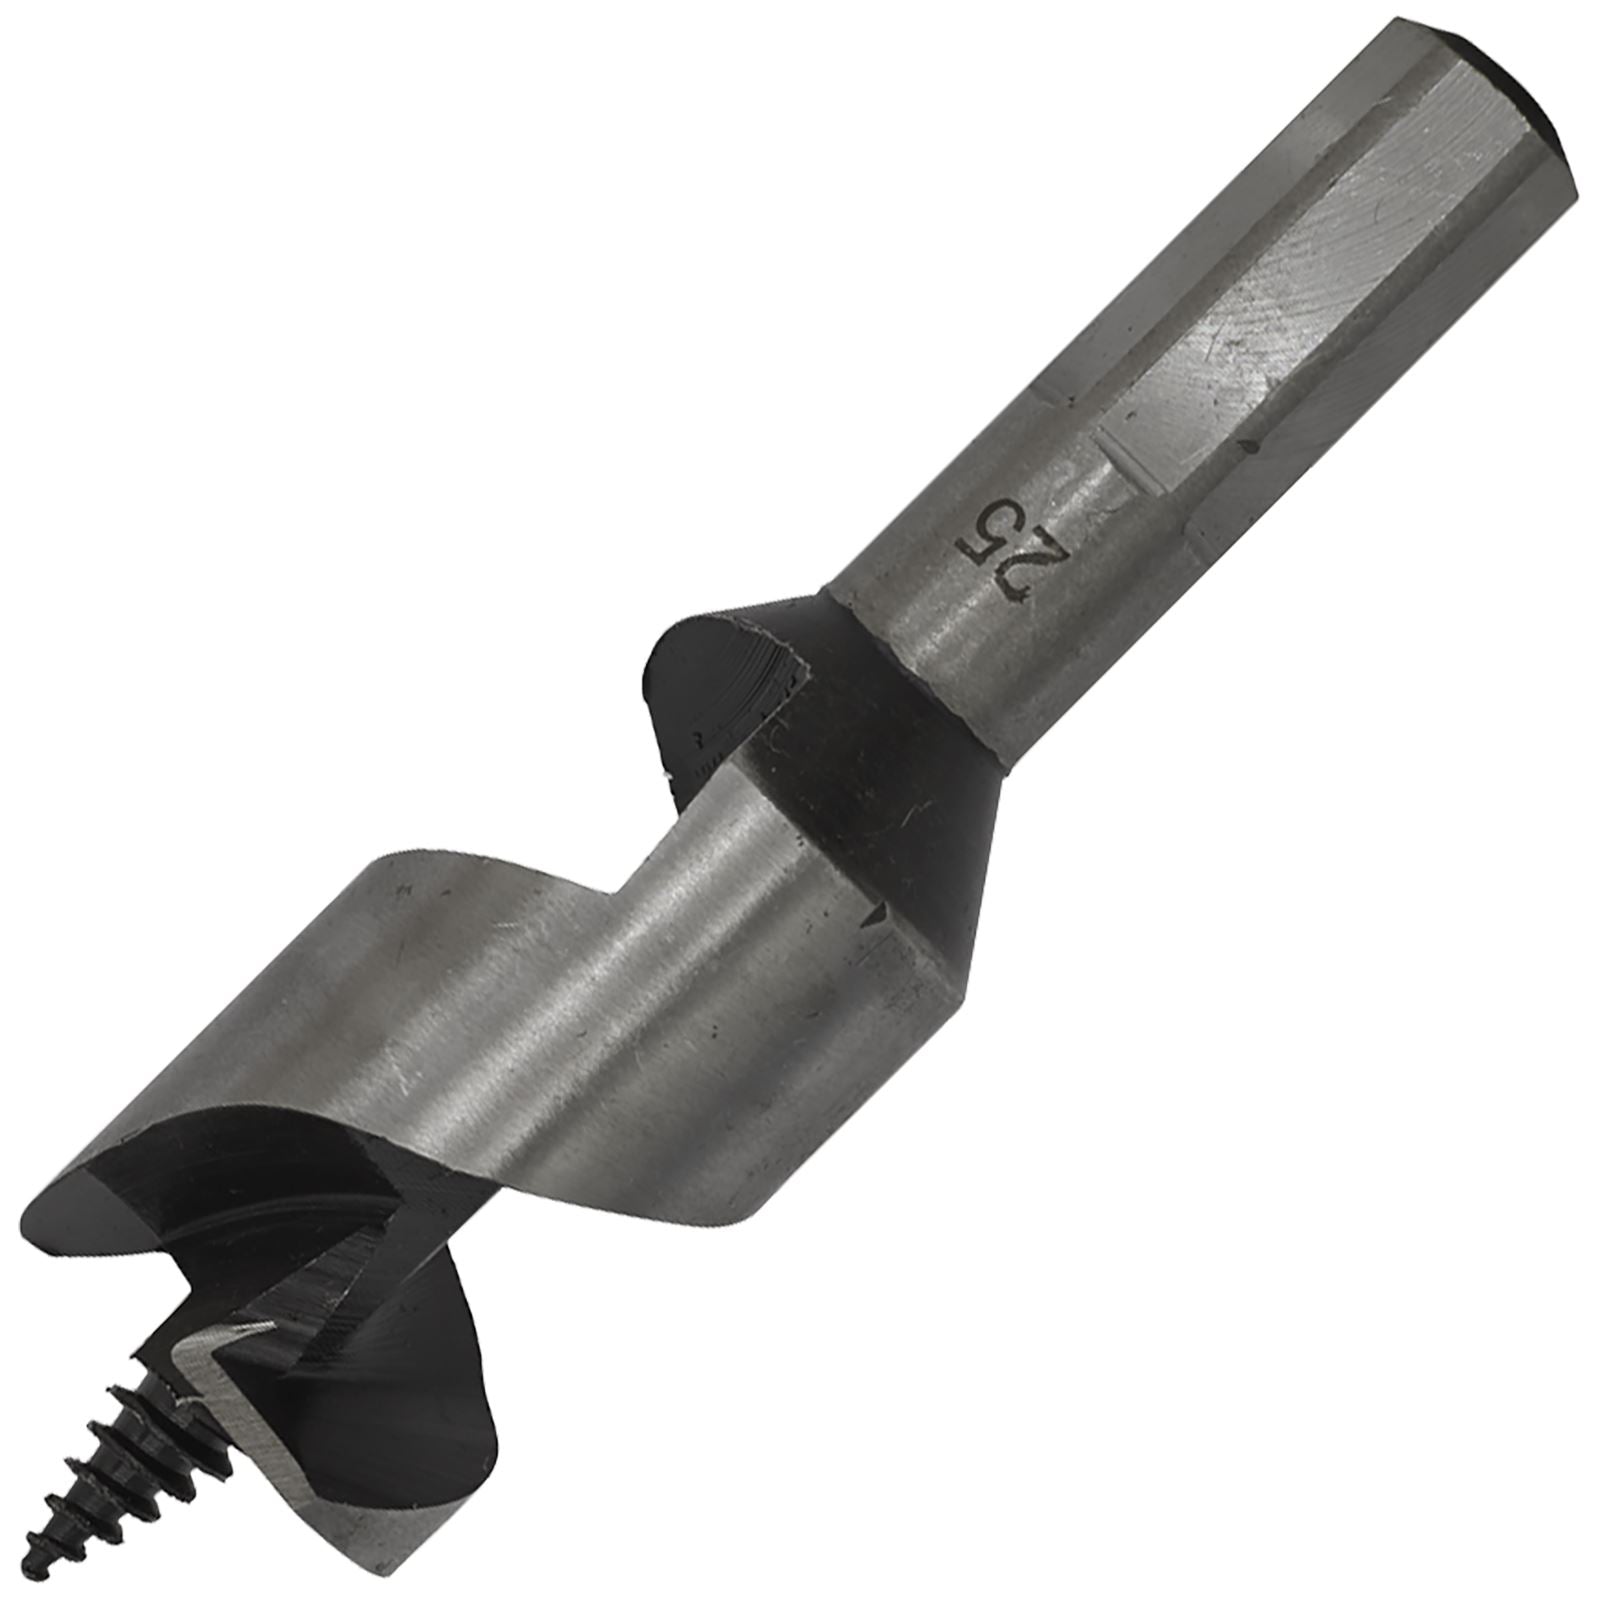 Worksafe by Sealey Auger Wood Drill Bit 25mm x 100mm